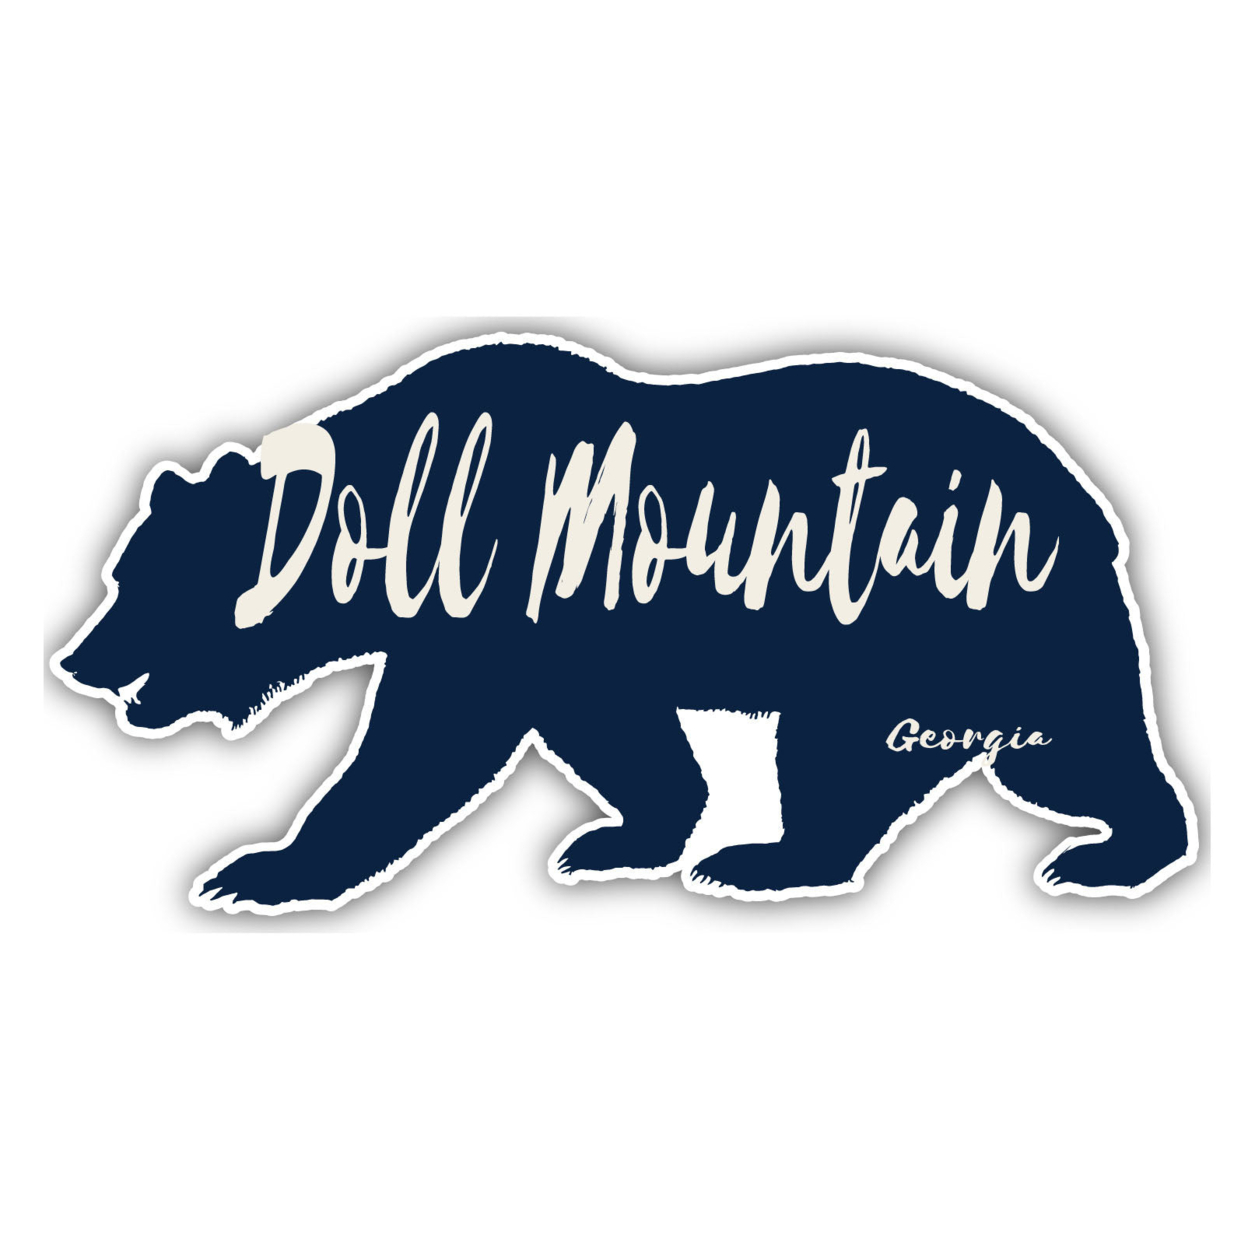 Doll Mountain Georgia Souvenir Decorative Stickers (Choose Theme And Size) - Single Unit, 6-Inch, Great Outdoors